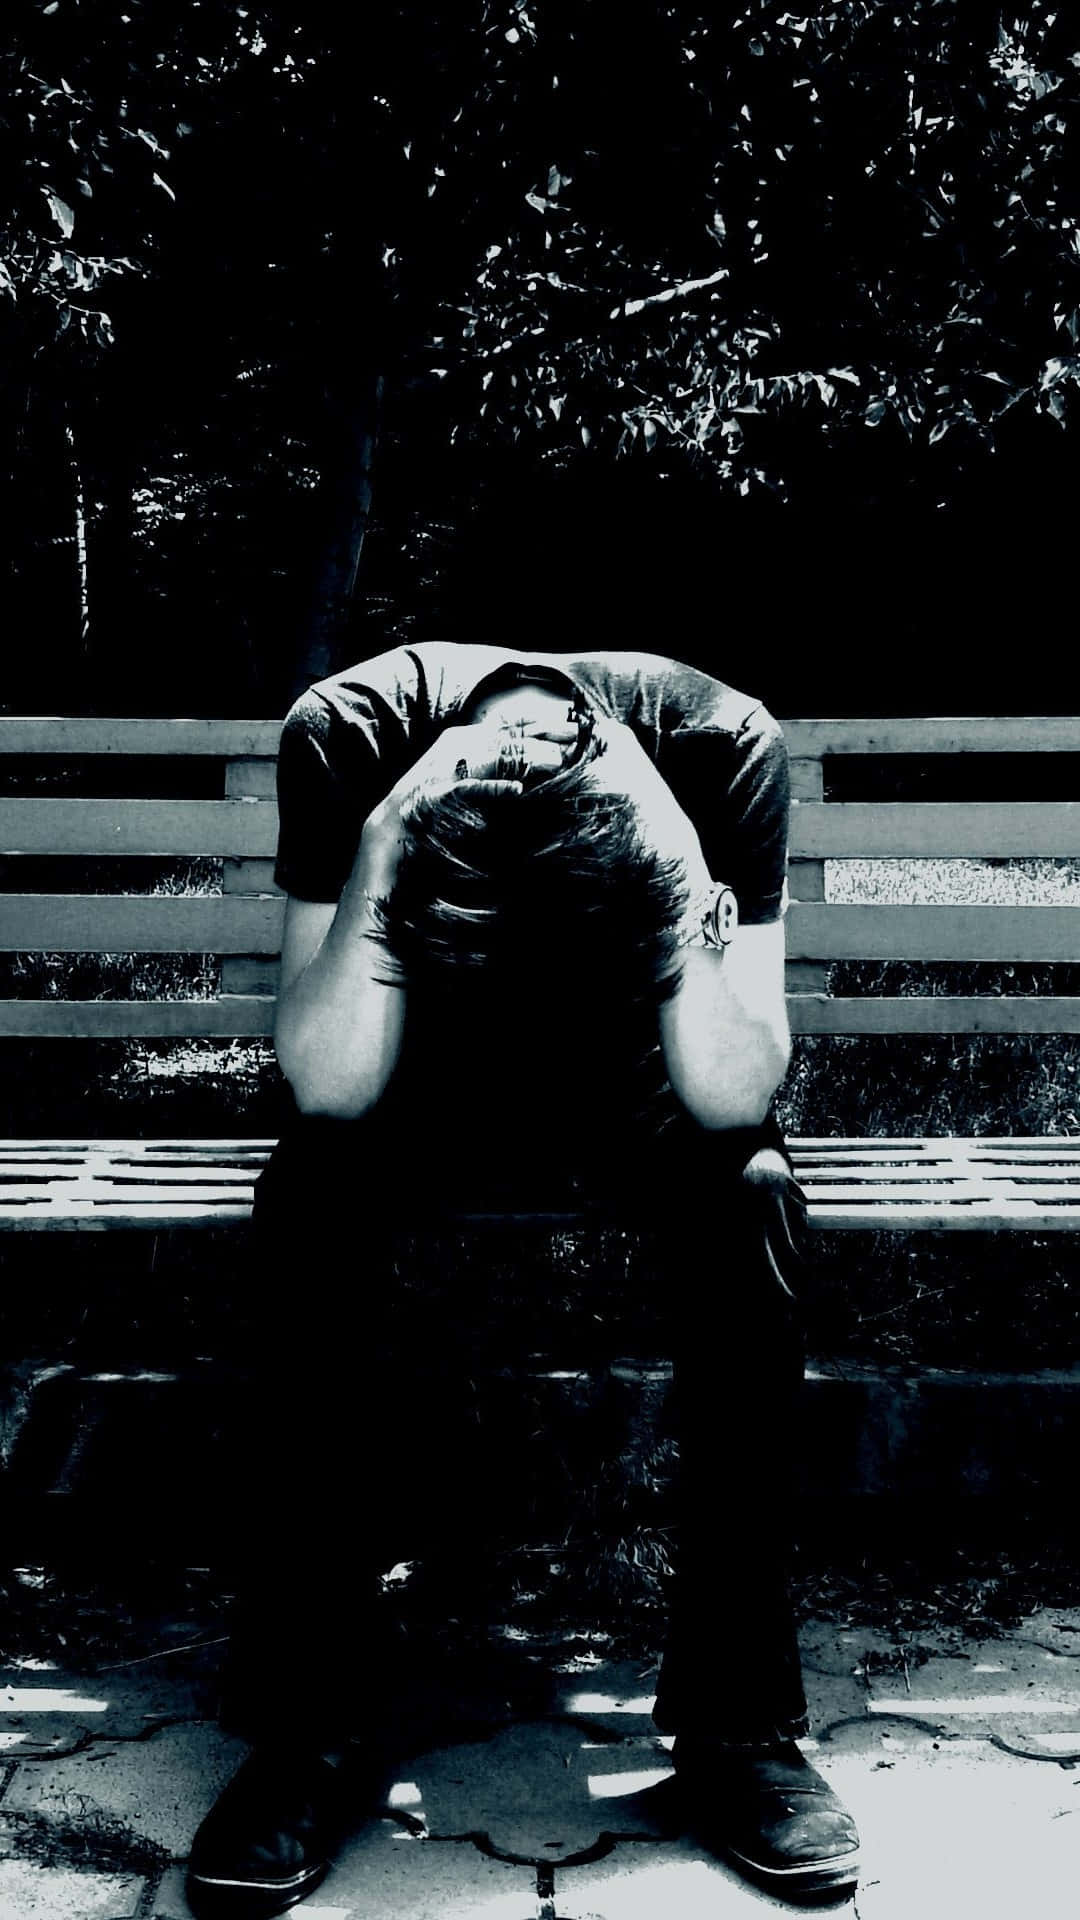 Man In Bench With Sadness Background